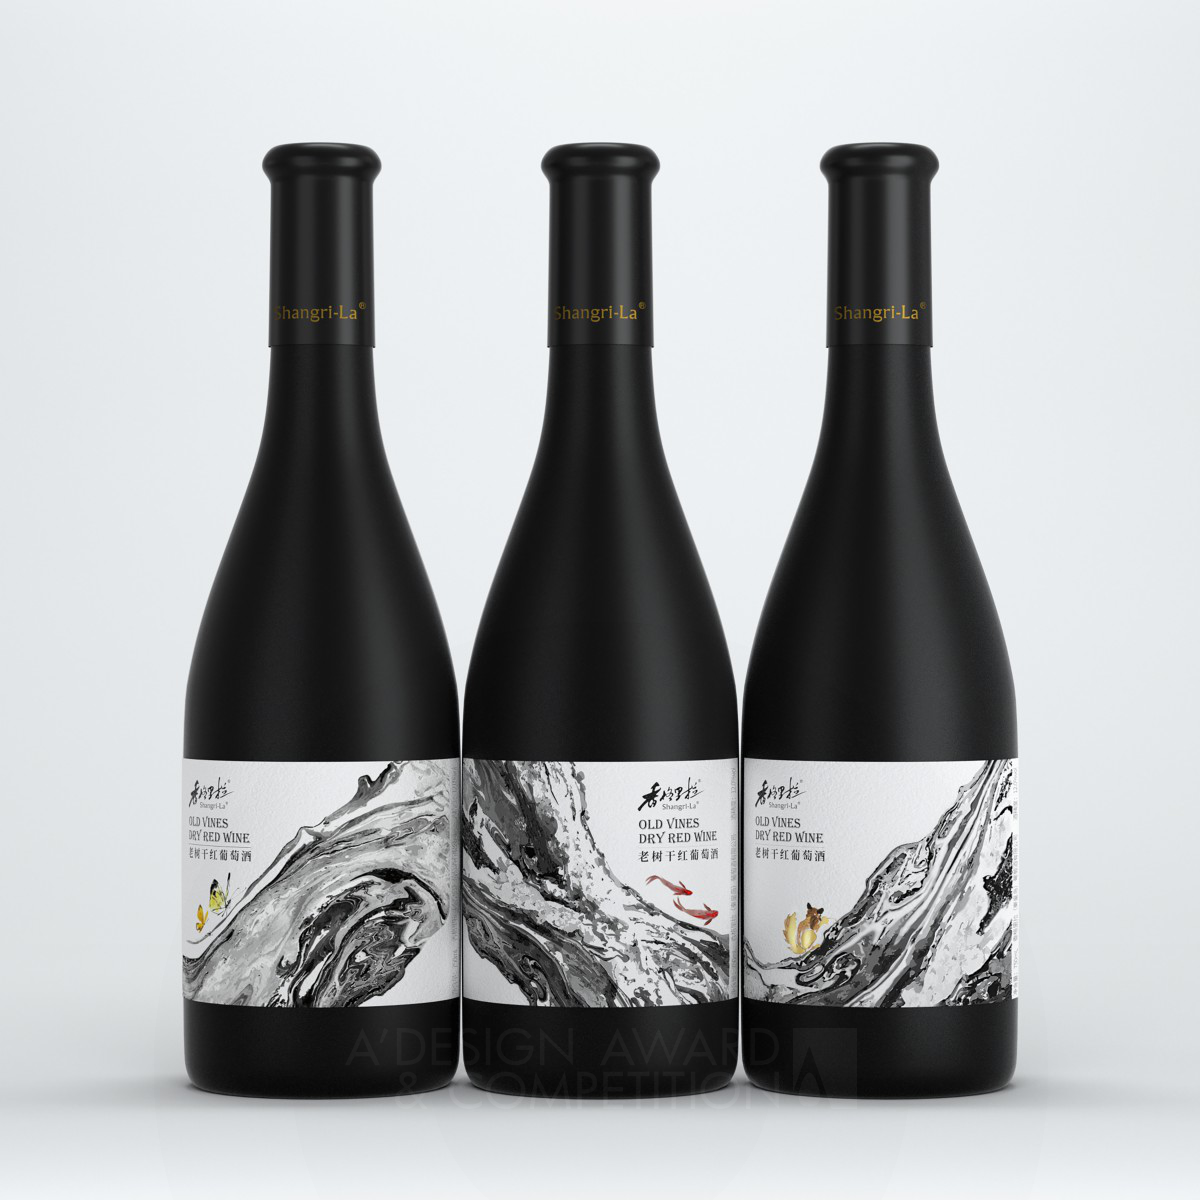 Pufine Creative wins Silver at the prestigious A' Packaging Design Award with Shangri La Red Wine.